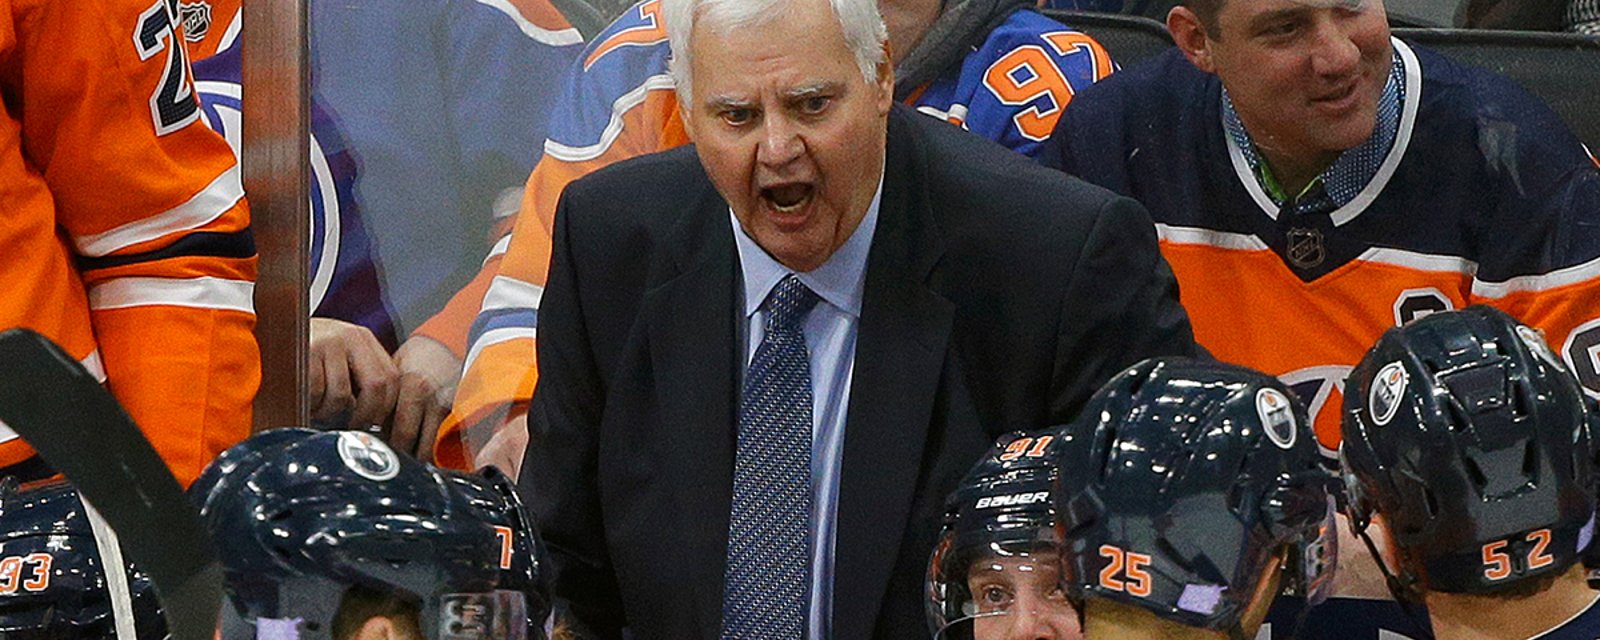 Oilers coach Hitchcock reportedly ready to resign from his position